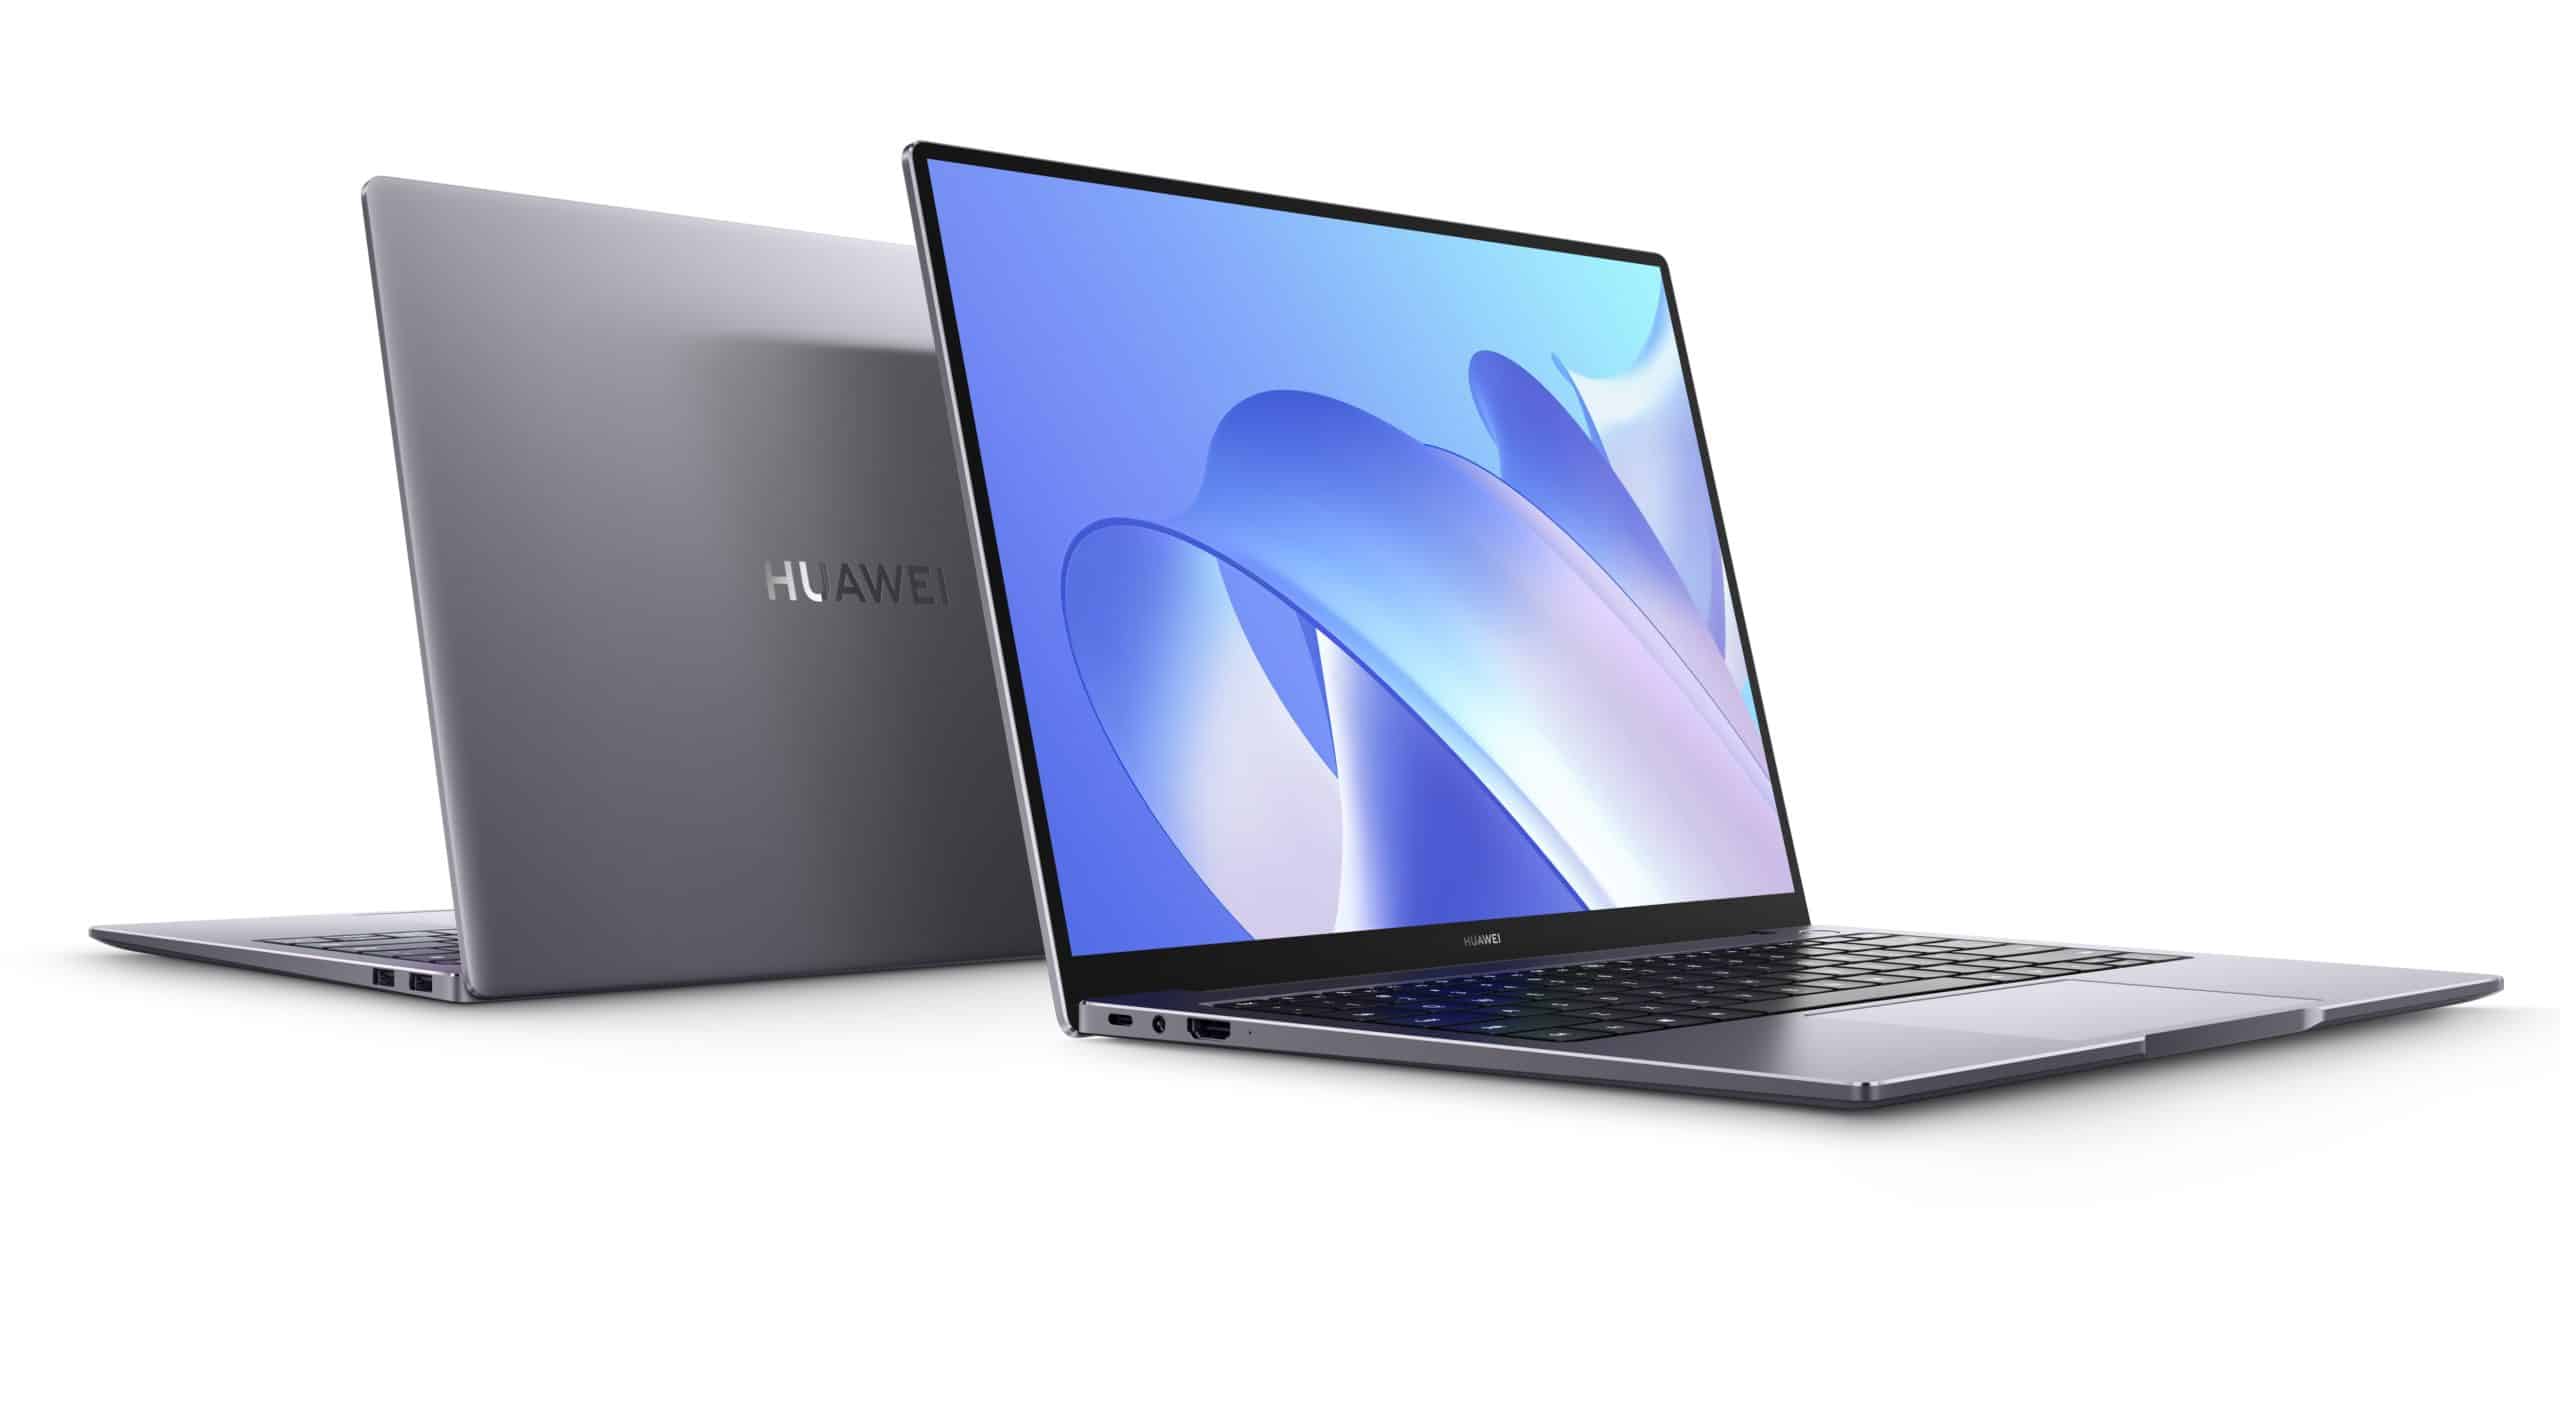 The 2K Huawei Matebook 14 laptop makes its much-awaited debut in the UAE